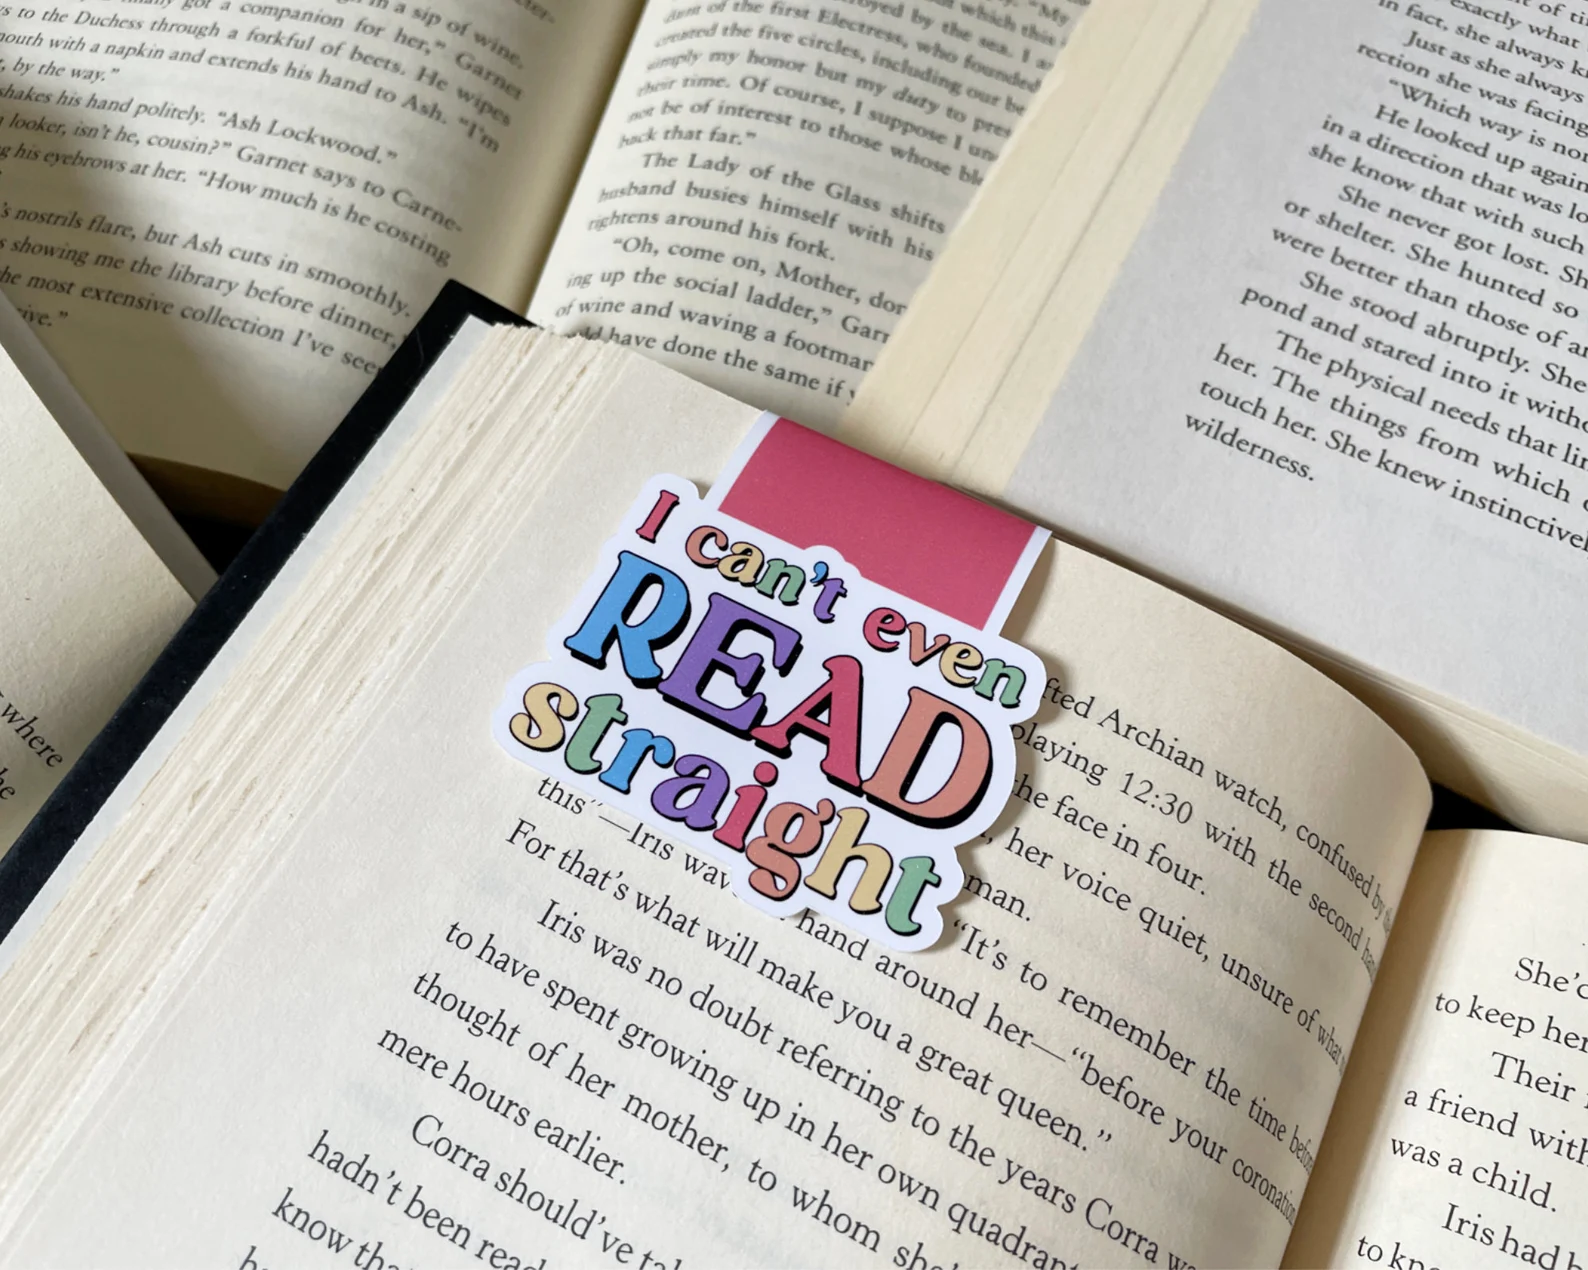 Image of a magnetic bookmark that says "I can't even read straight"